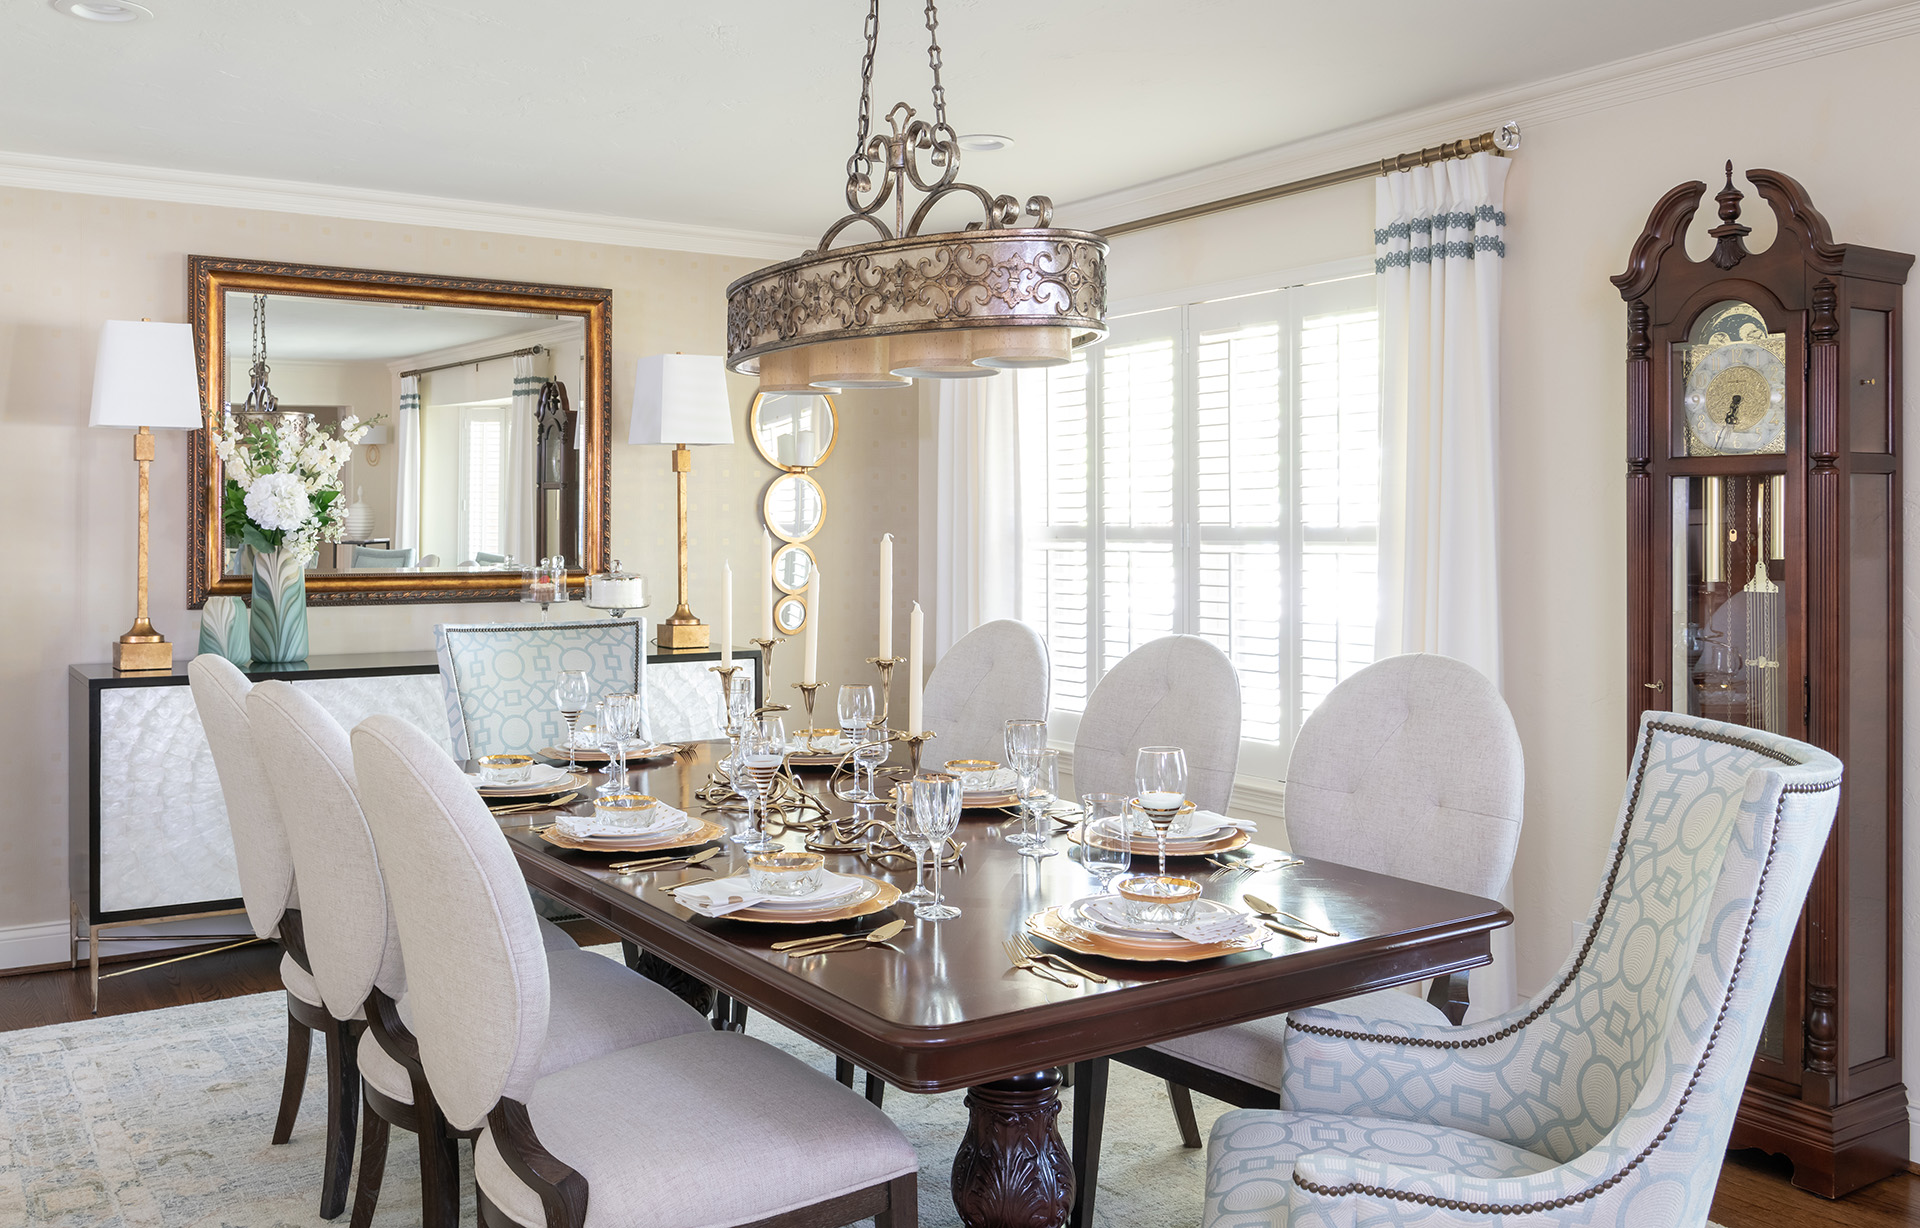 How to Get Your Dining Room Ready for Fall Entertaining